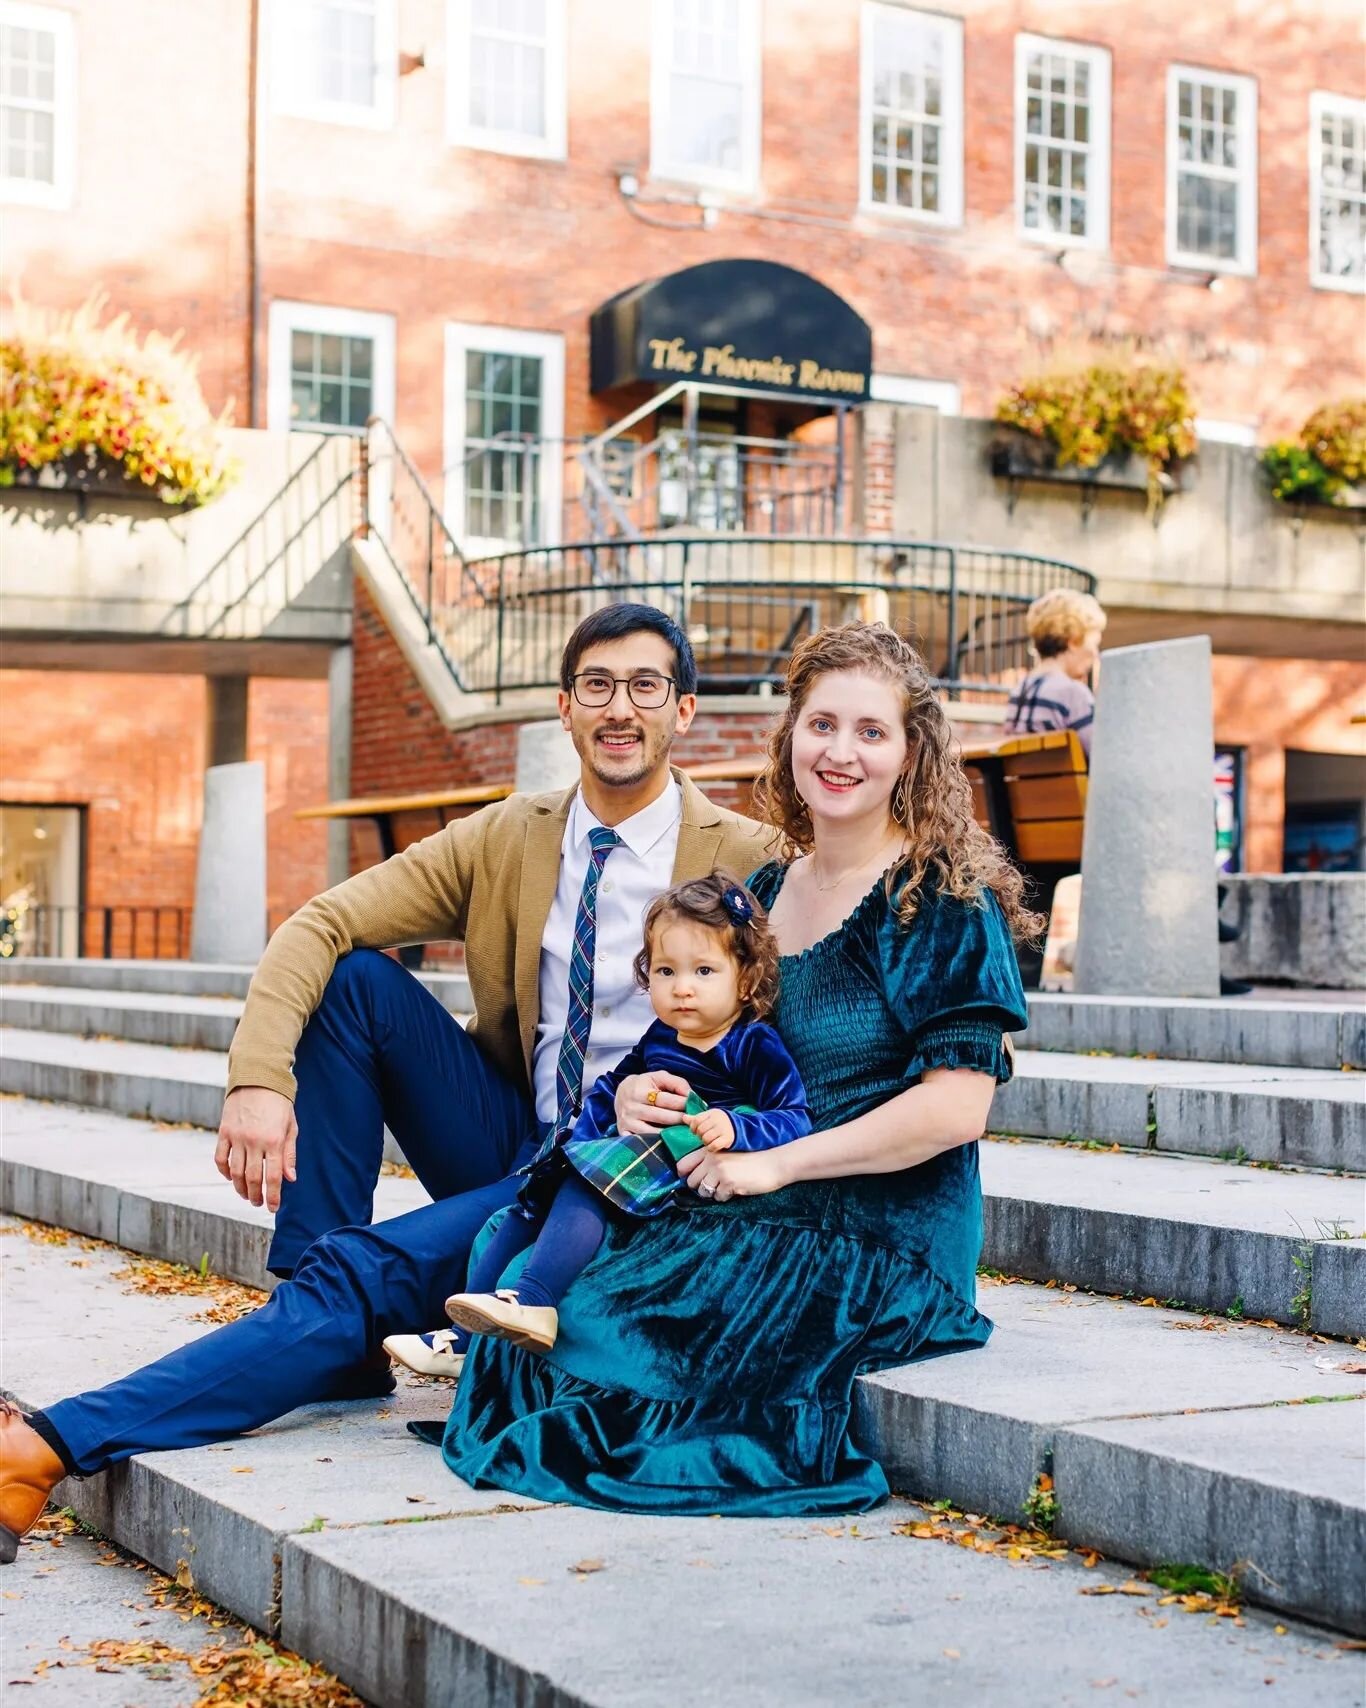 This was another fantastic family shoot a few weeks ago in downtown Newburyport. We couldn't have asked for better weather, it felt like summer instead of a fall shoot.

.
.
.
#casacreativesphotography #casacreatives #makeportraits #portrait_shots #p